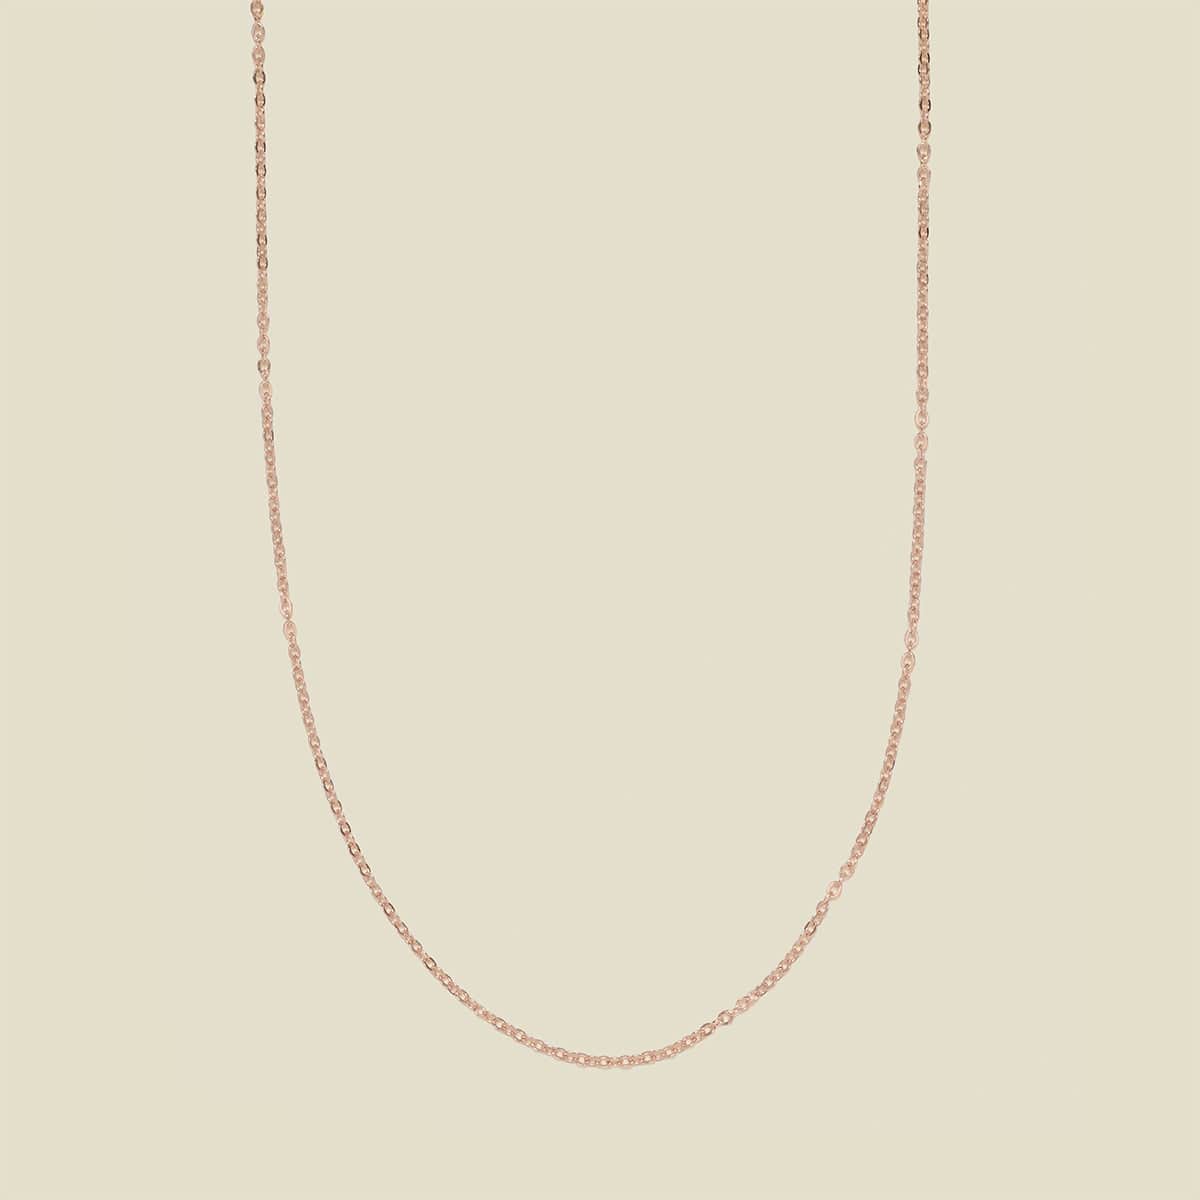 Adjustable Flat Cable Chain Rose Gold Filled / 1.2mm / 13"-15" Necklace